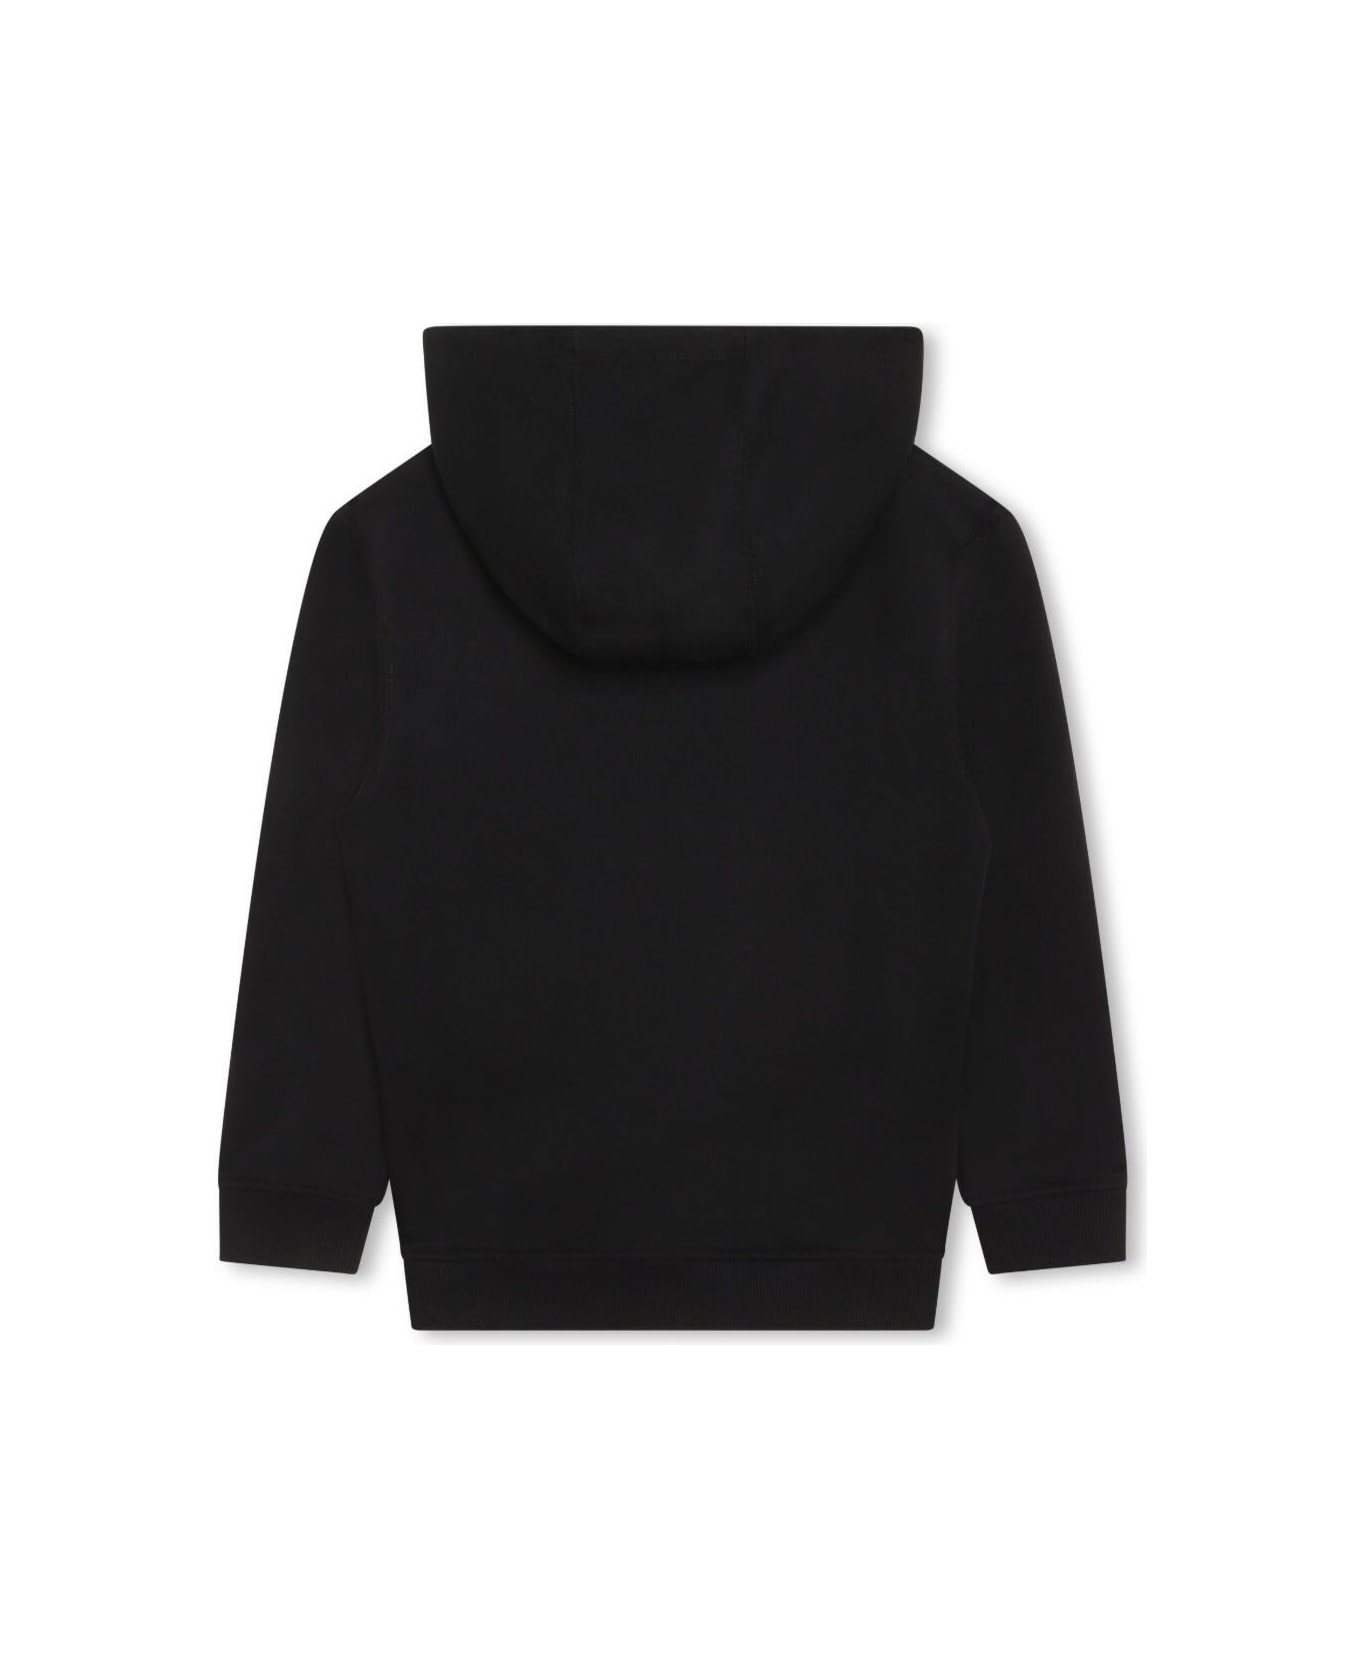 Givenchy Black Hoodie And Contrasting Maxi Logo In Cotton Blend Boy - Black